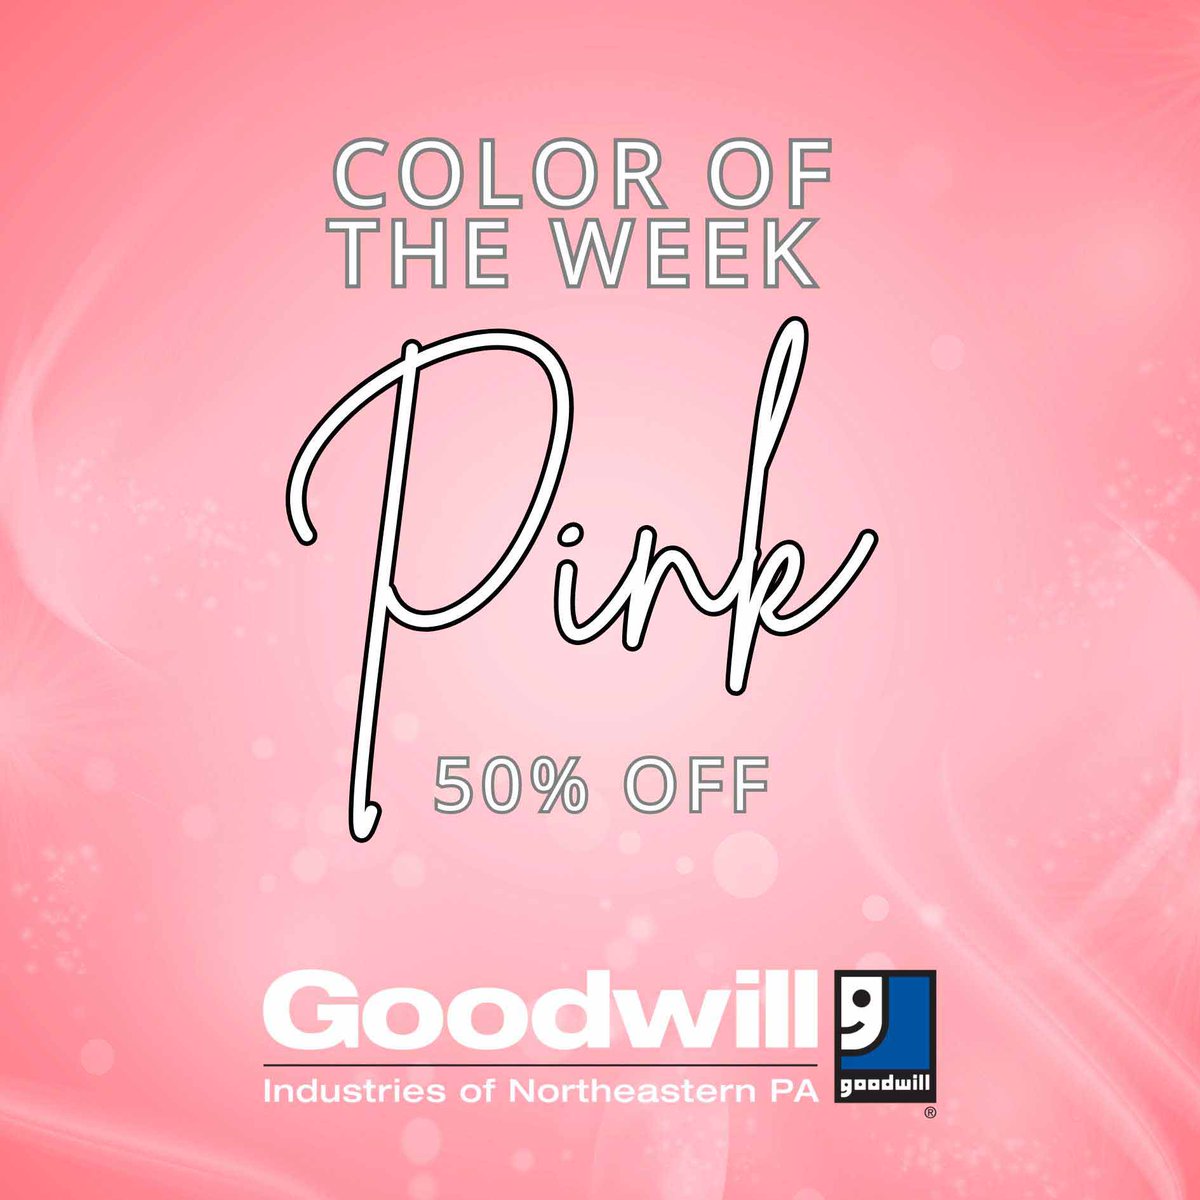 This week's 50% off color of the week is
🌺PINK🌺
#HappyThrifting #GoodwillofNEPA